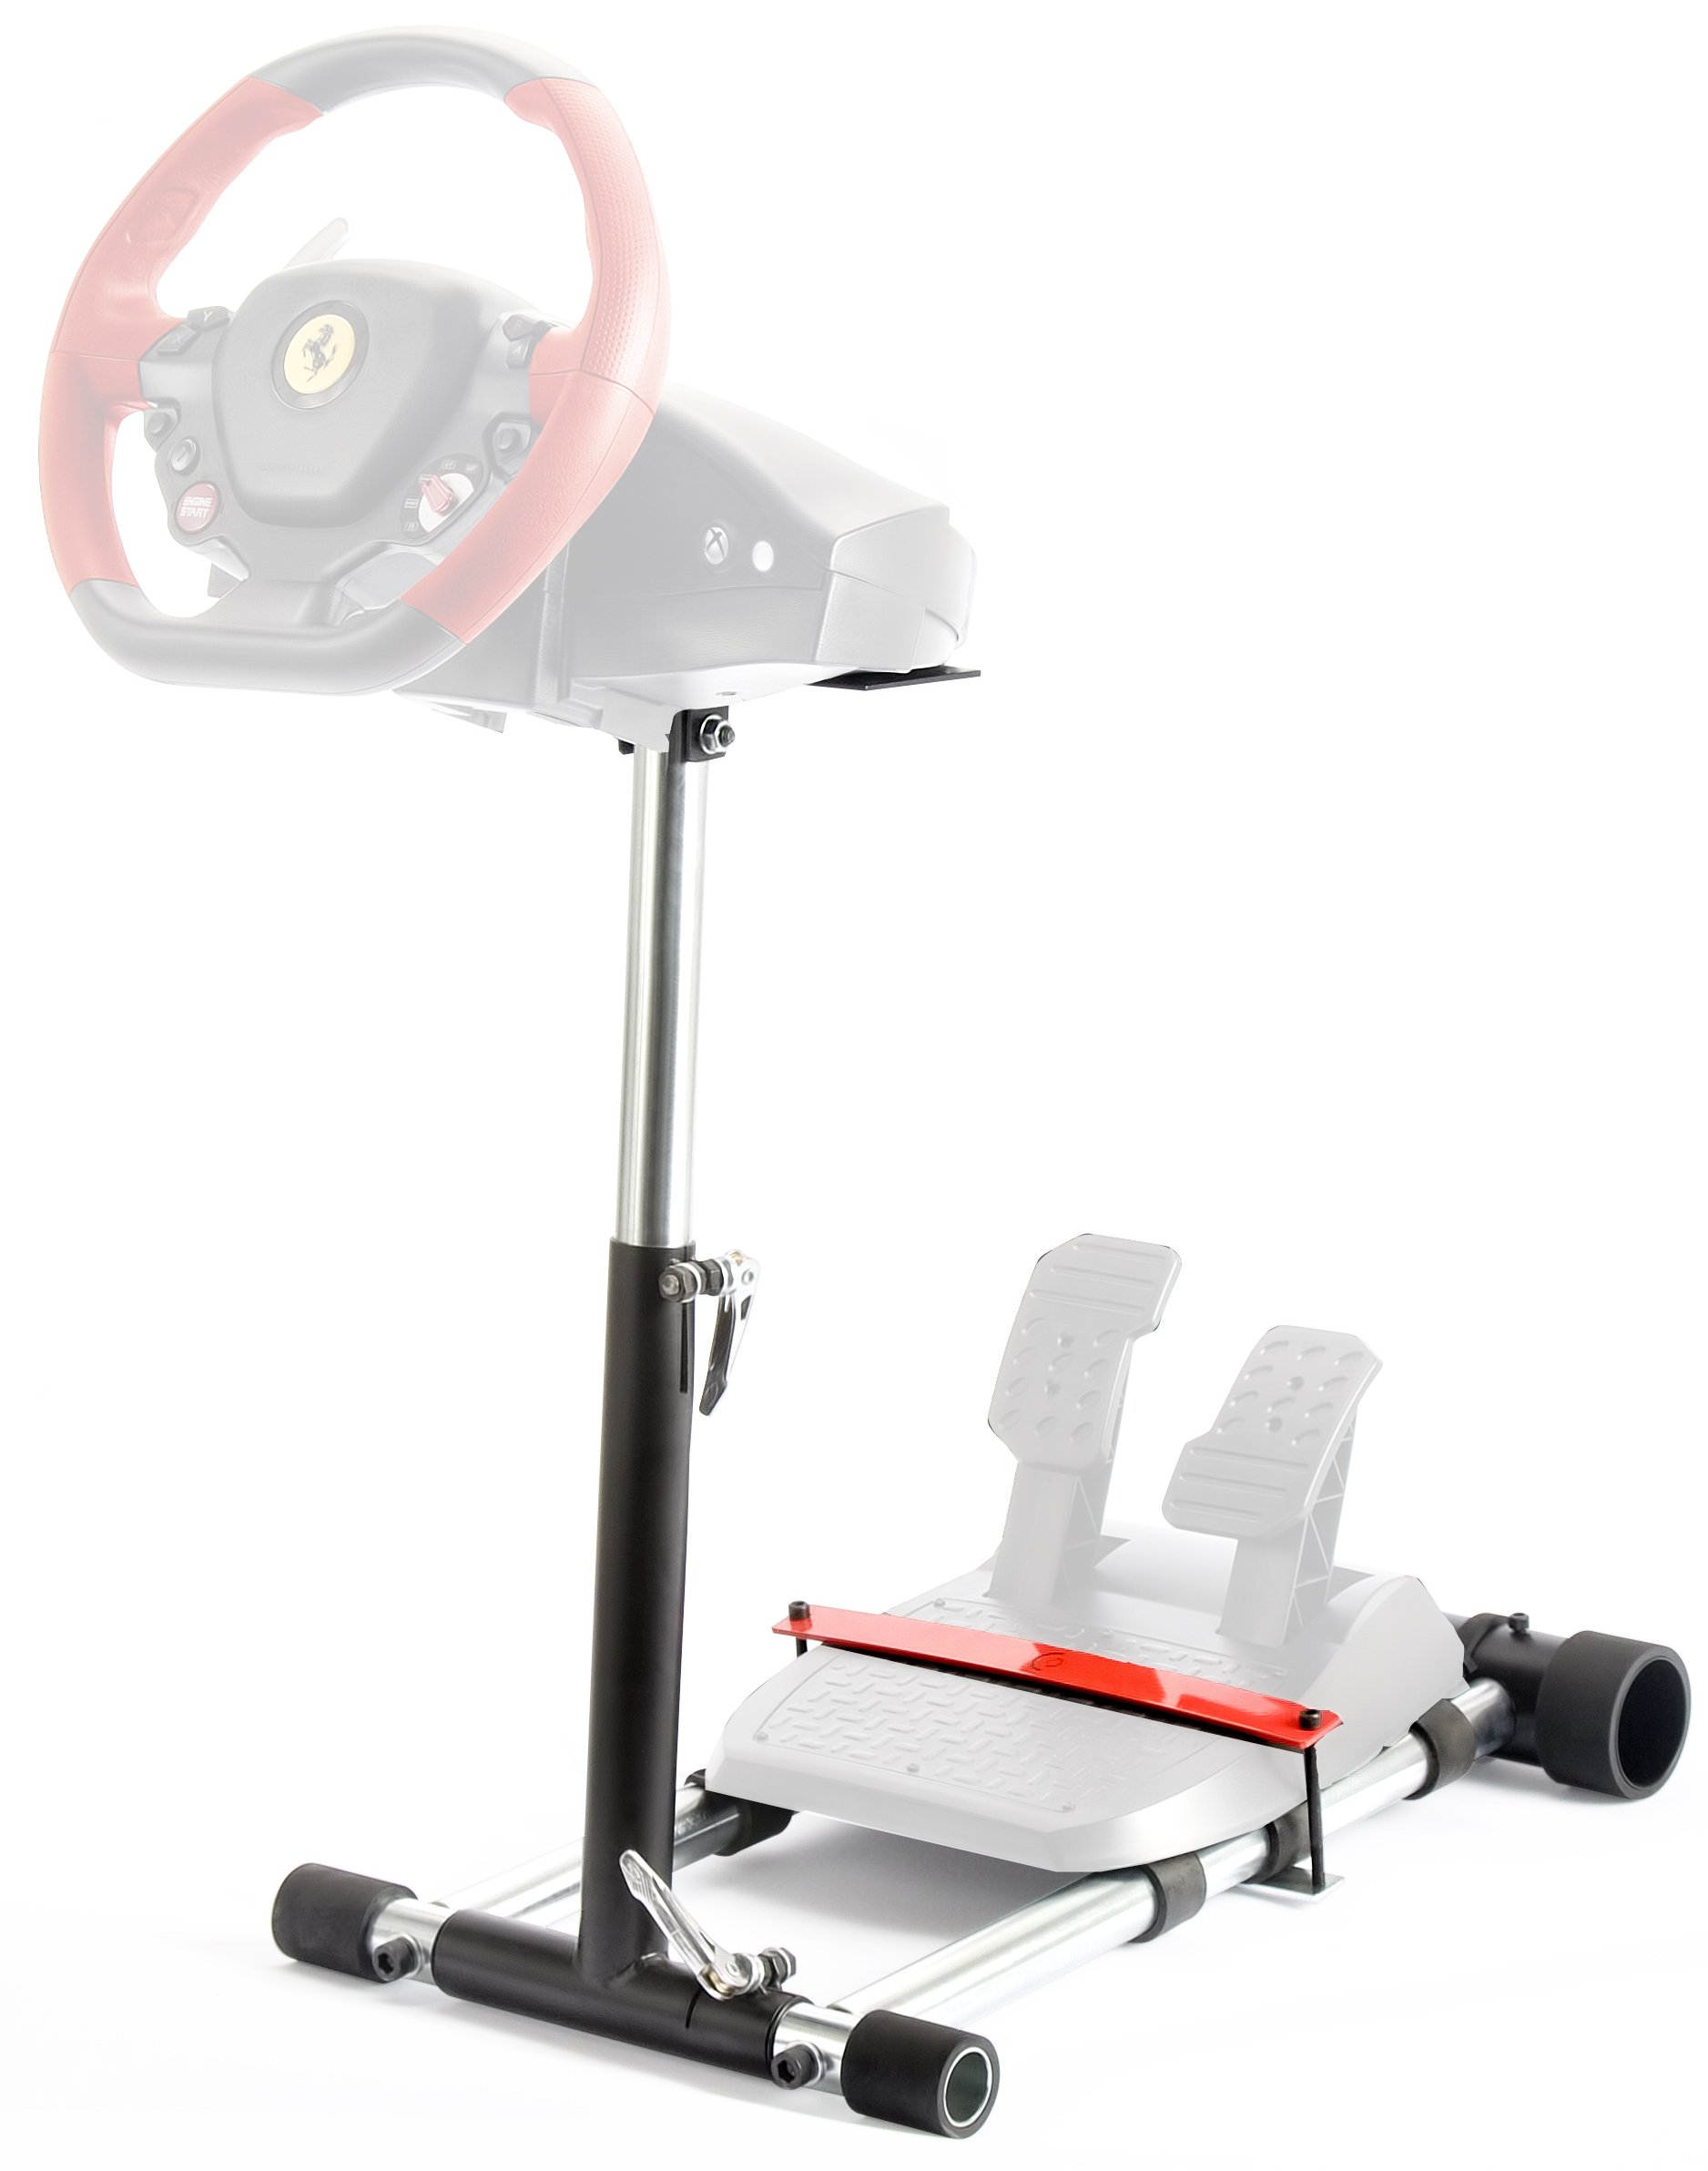 Wheel Stand Pro F458 Steering Wheelstand Compatible With Thrustmaster 458 (Xbox 360) F458 Spider (Xbox One), T80,T100, RGT, Ferrari GT,F430; Logitech Driving Force GT V2: Wheel/Pedals Not included